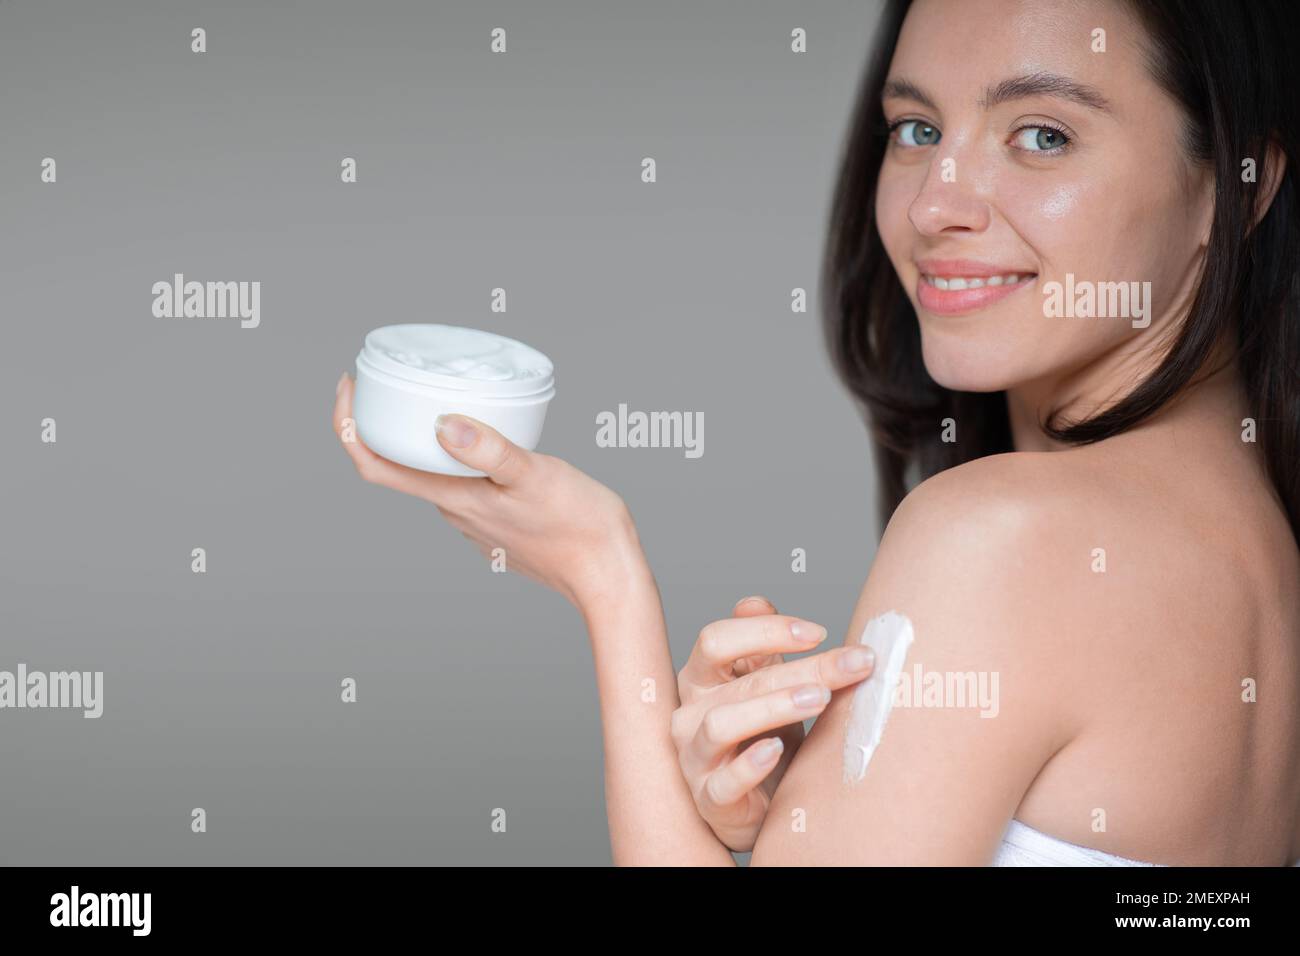 Smiling young european woman without makeup with natural beauty applies cream on shoulder, holds jar Stock Photo